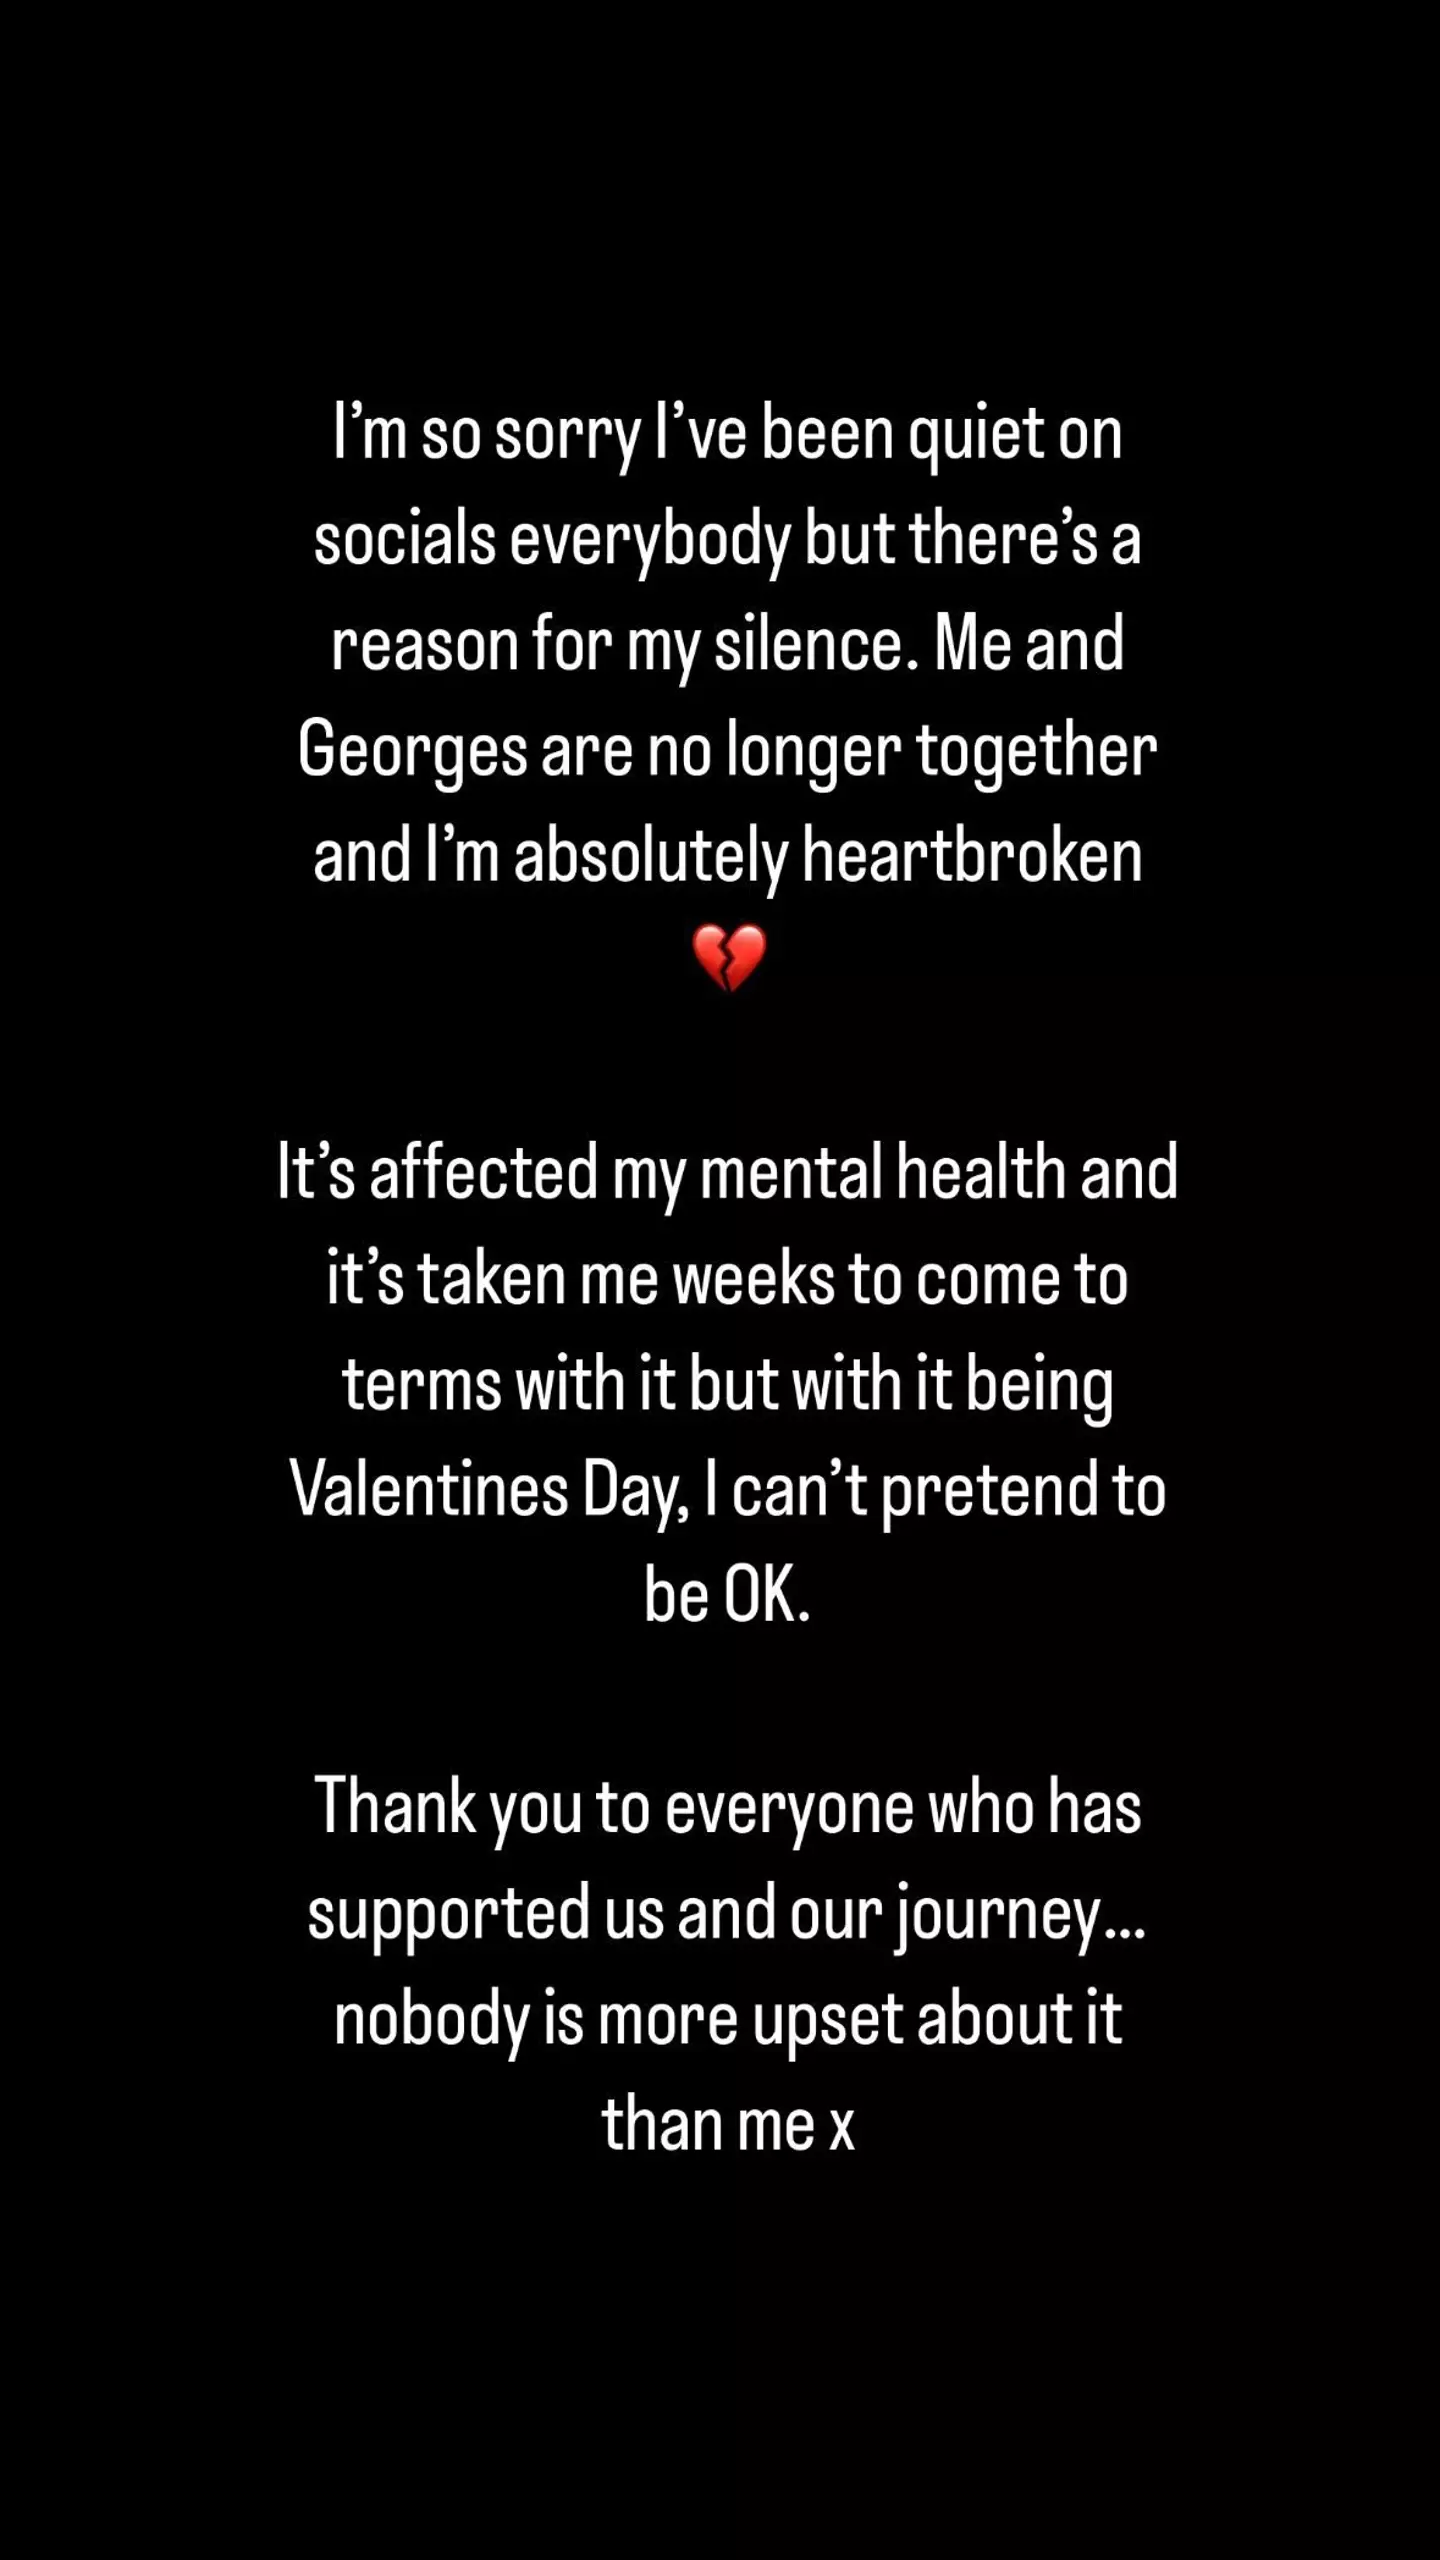 Peggy Rose announced her split from Georges Berthonneau on Instagram this afternoon (14 February).